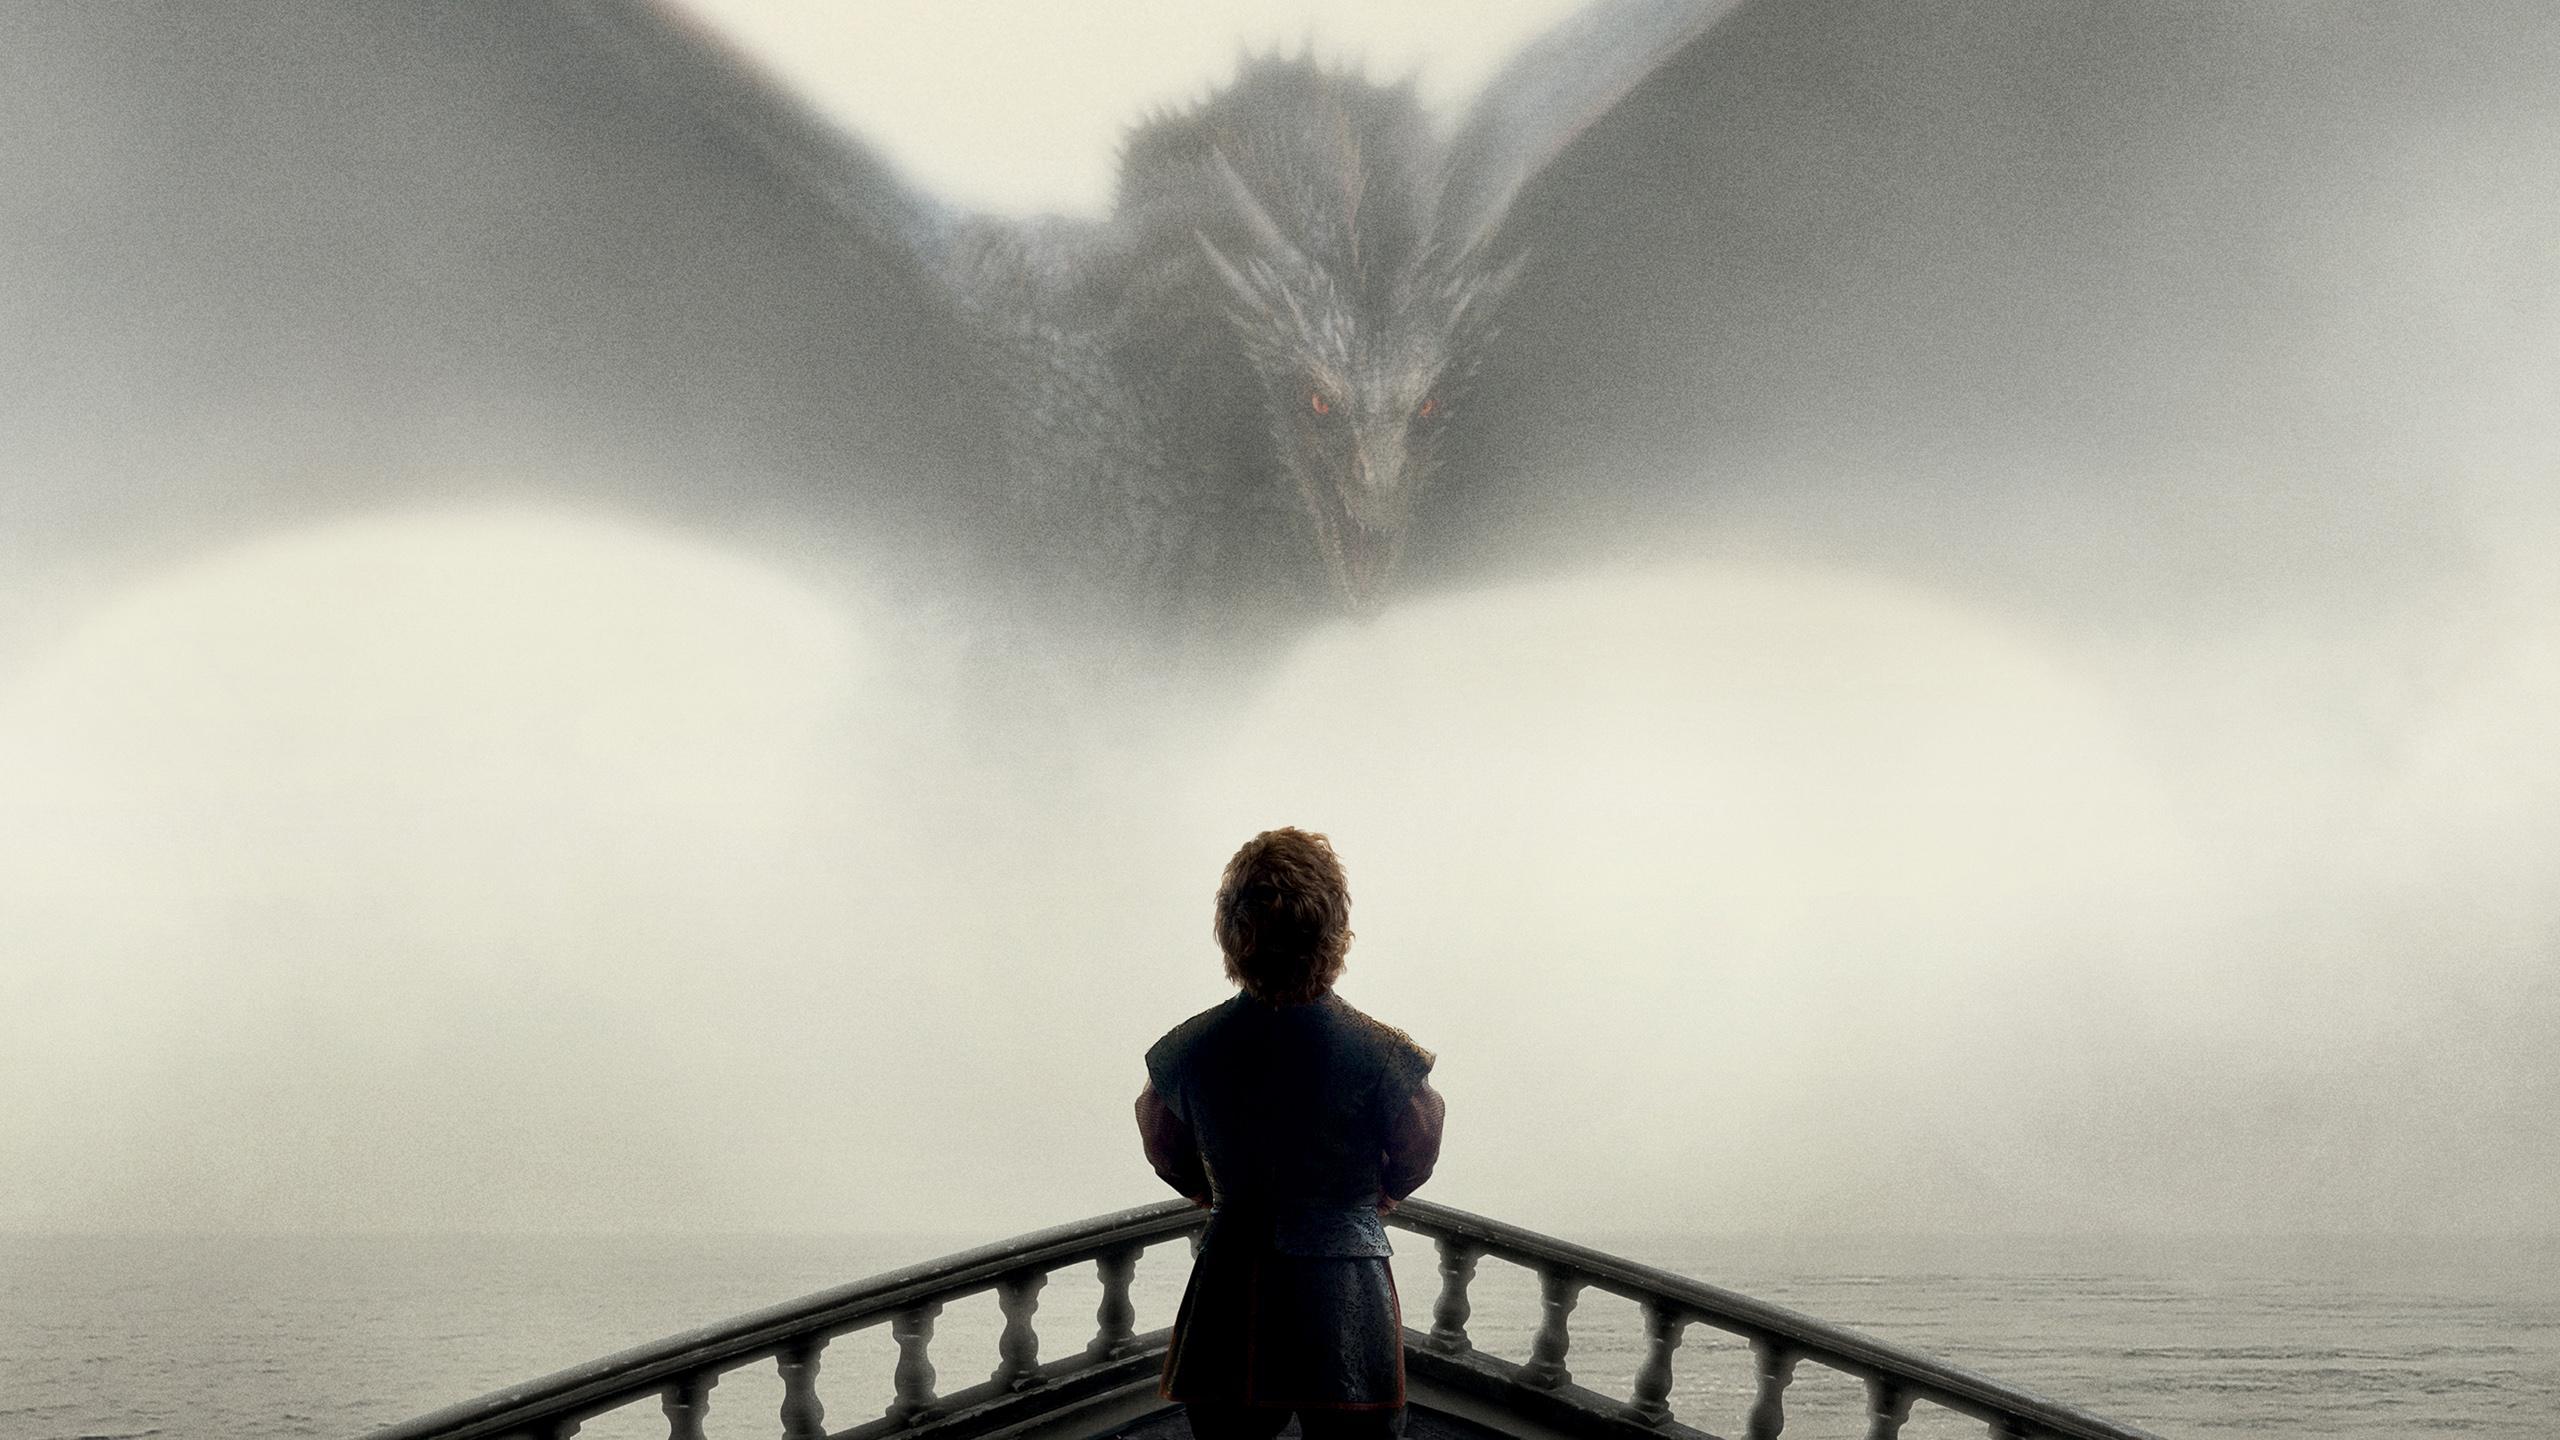 Download Game Of Thrones Wallpaper 2560x1440, HD Backgrounds Download ...